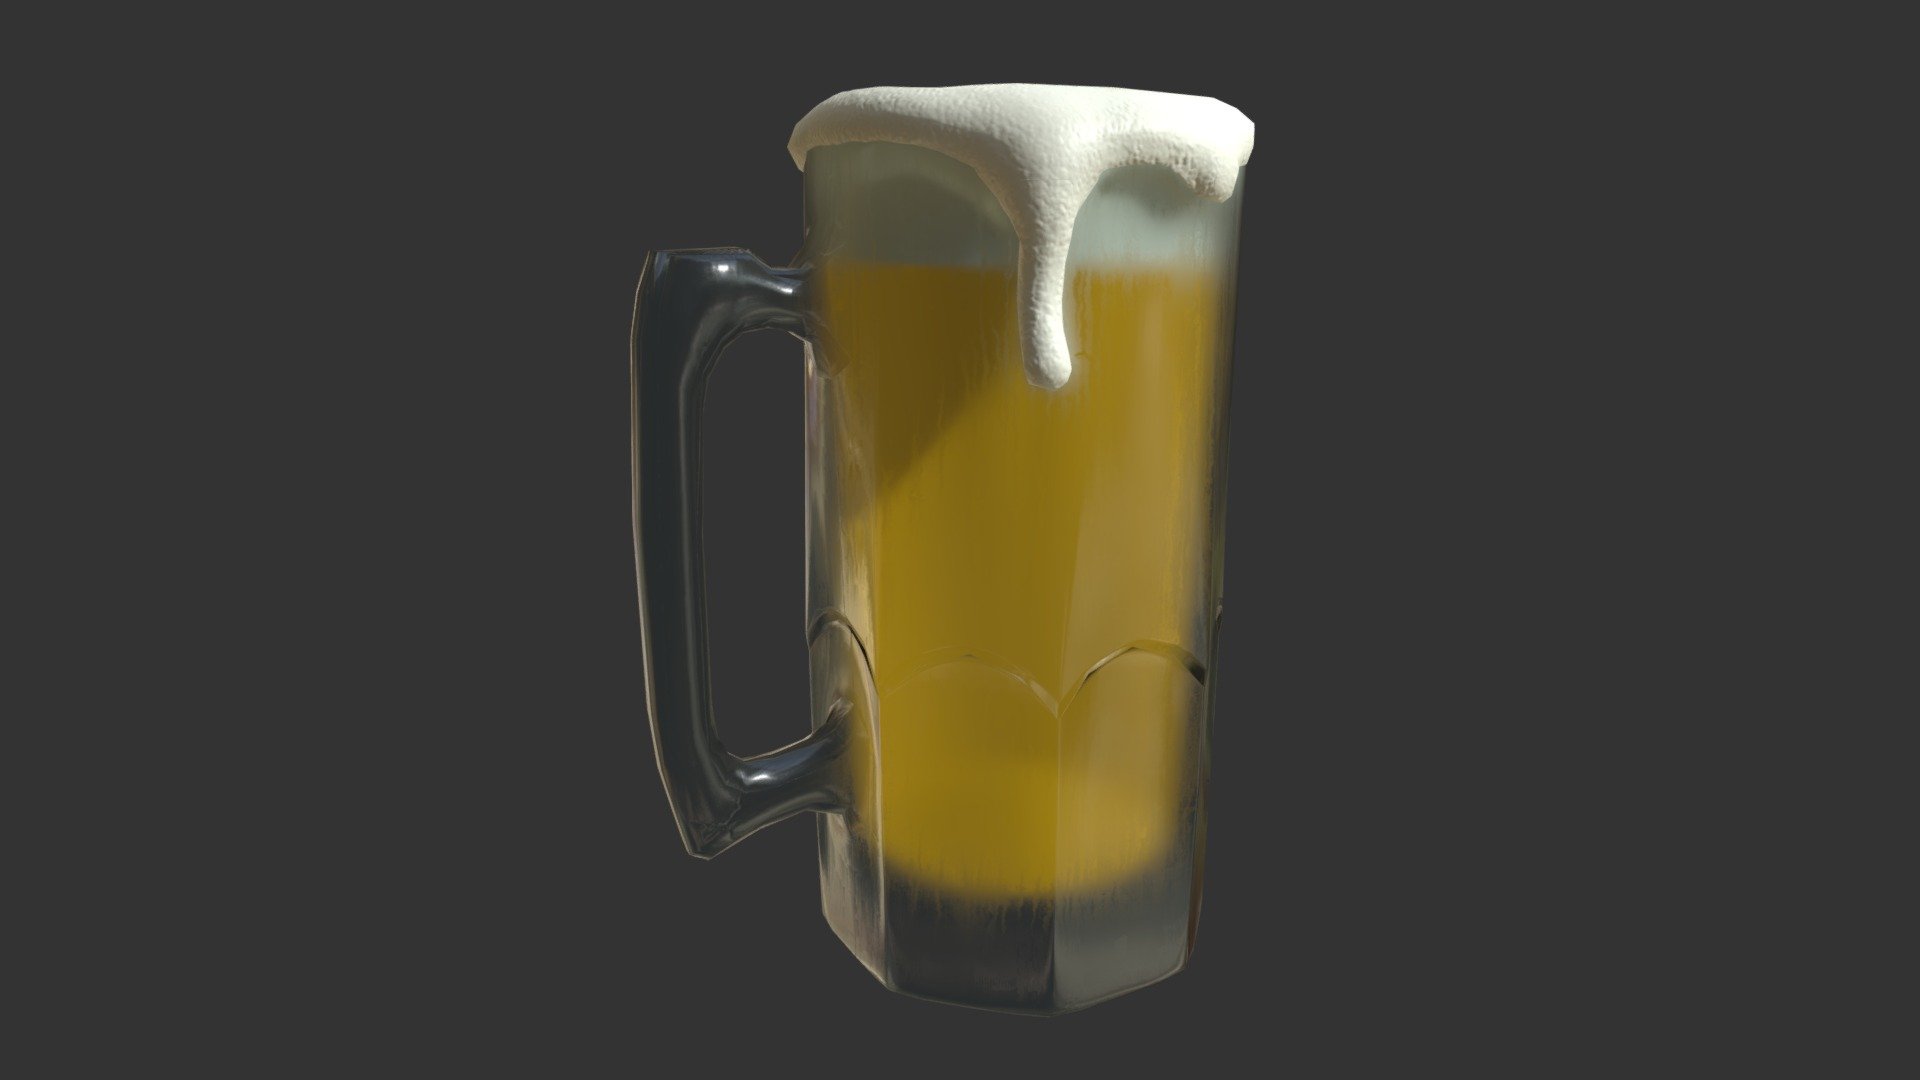 Classic Mug style chilled overnight in the freezer offering up a cool beverage.

*Old model that was resurrected when refraction was added. Still intend to add bubbles, and some more details 3d model